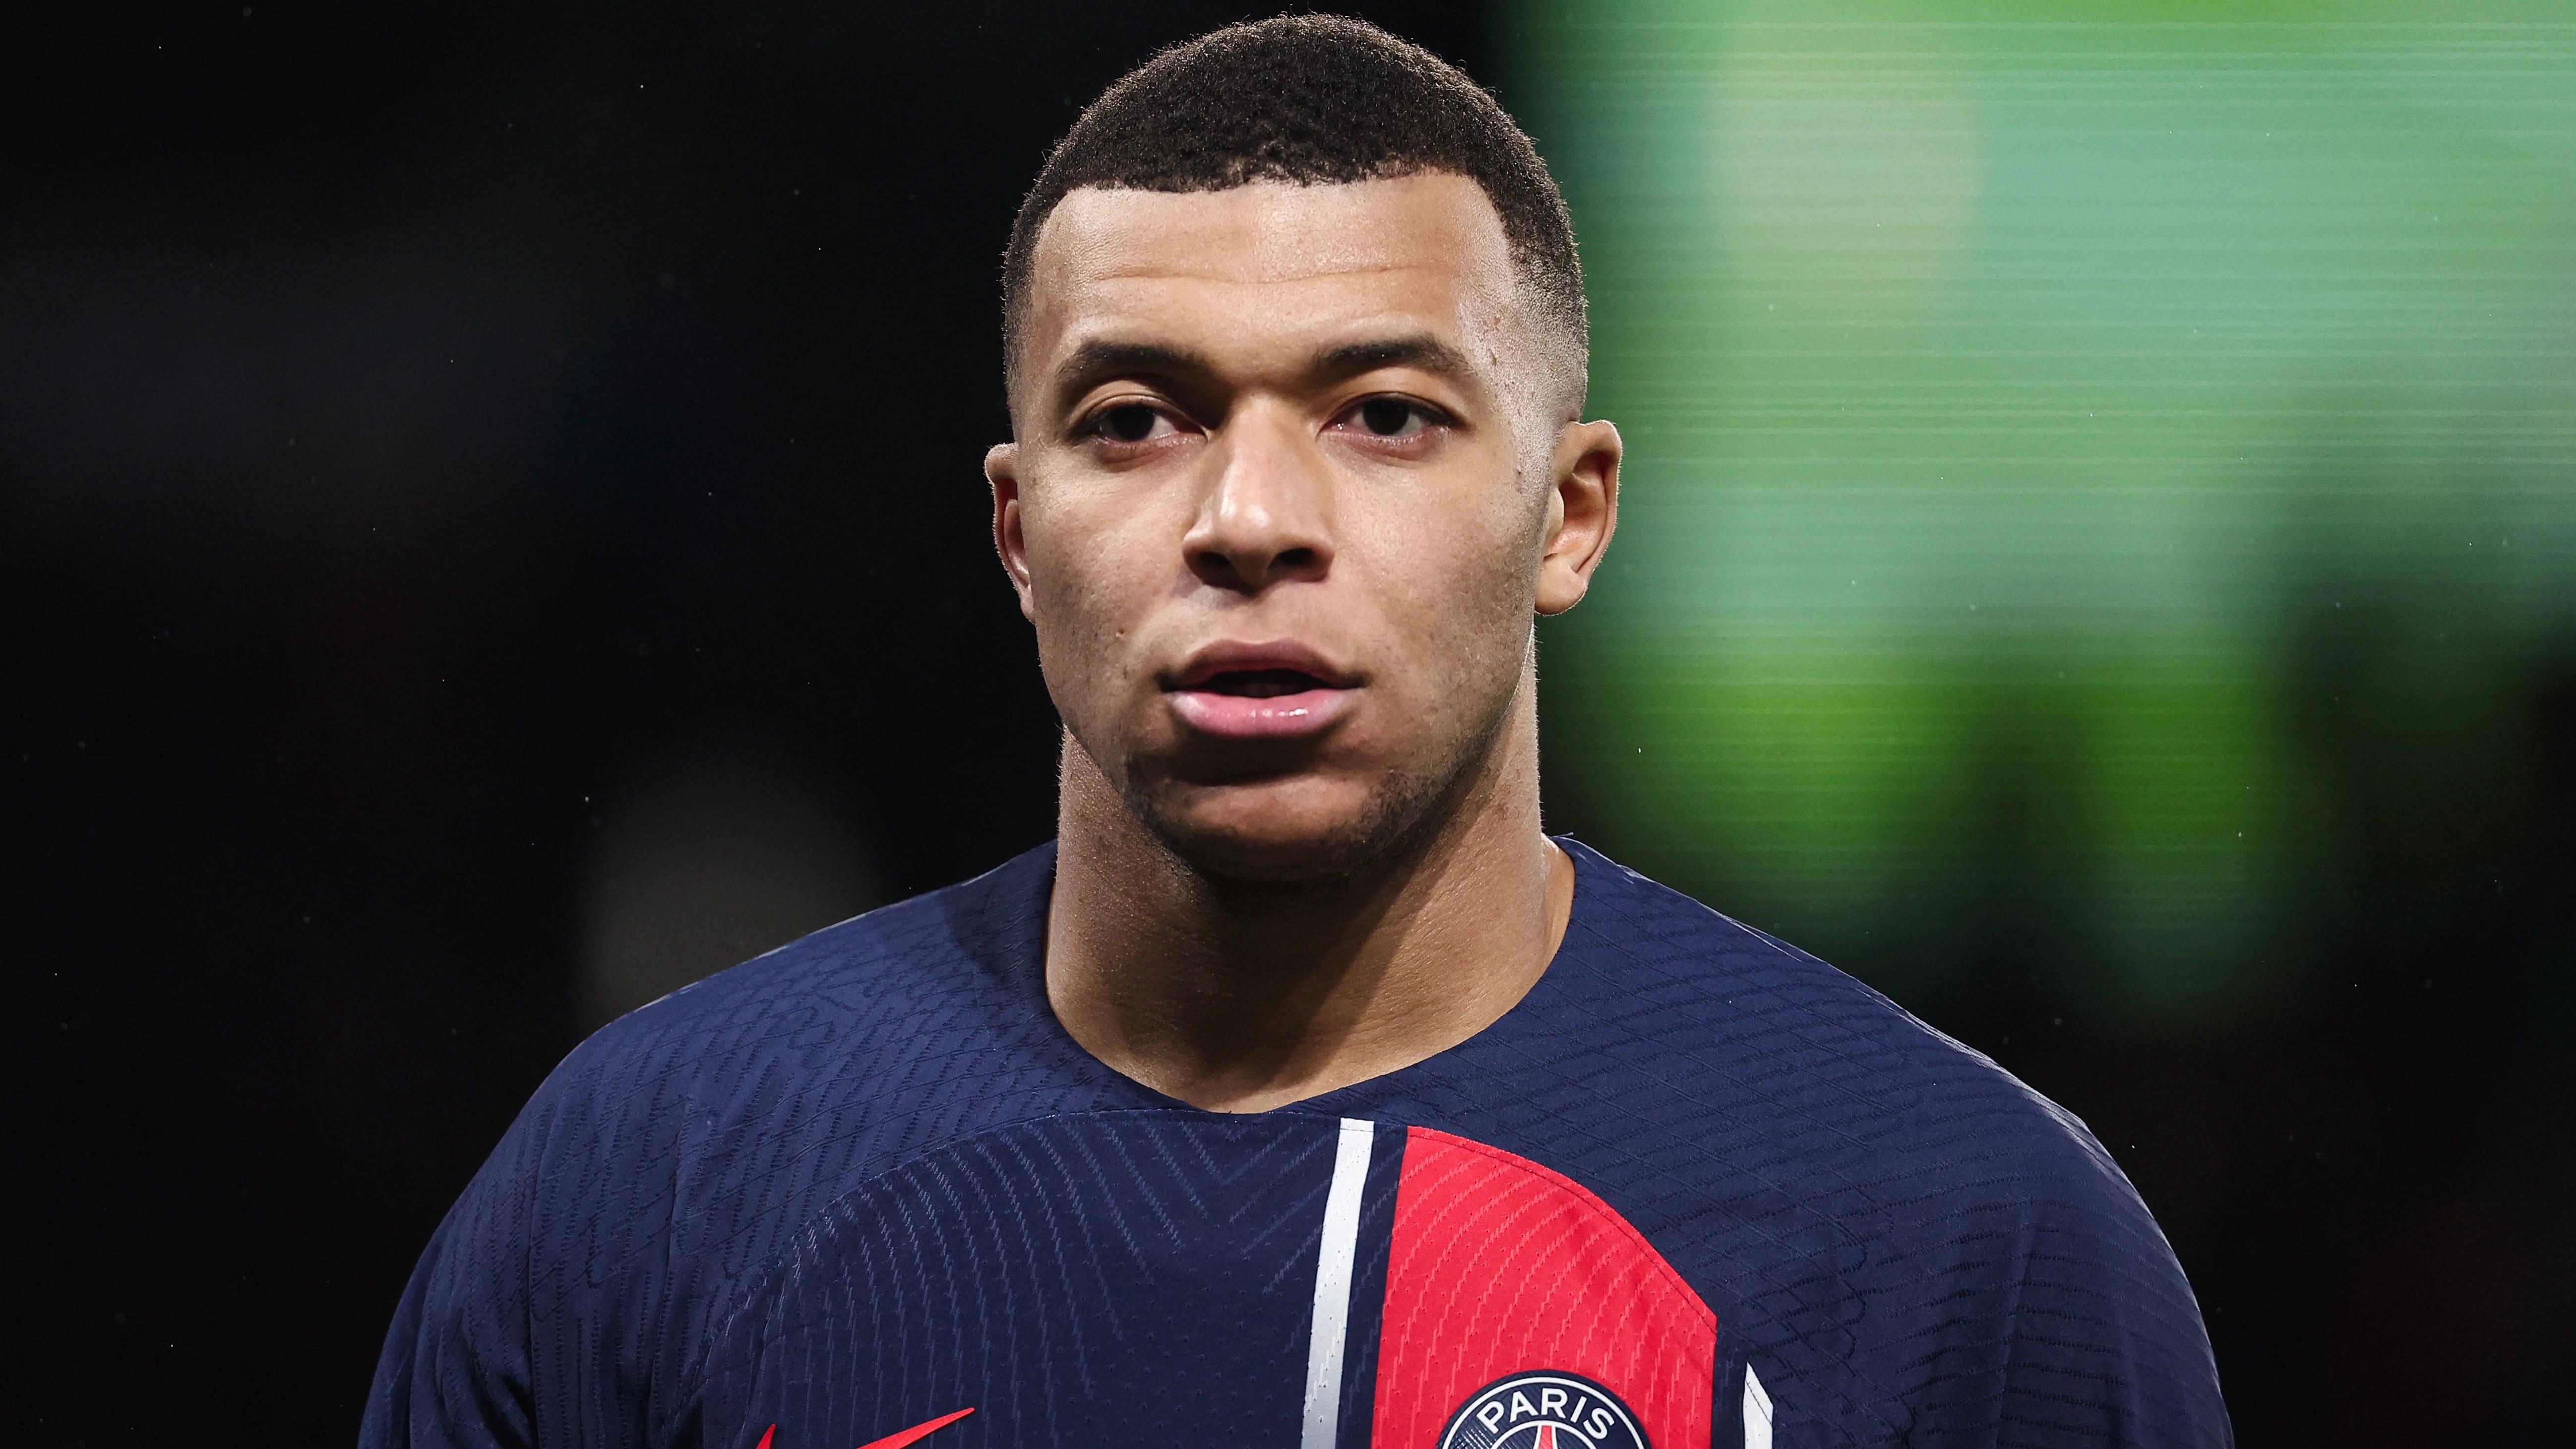 a-binding-contract-forces-mbappe-to-make-a-huge-sacrifice-for-real-madrid